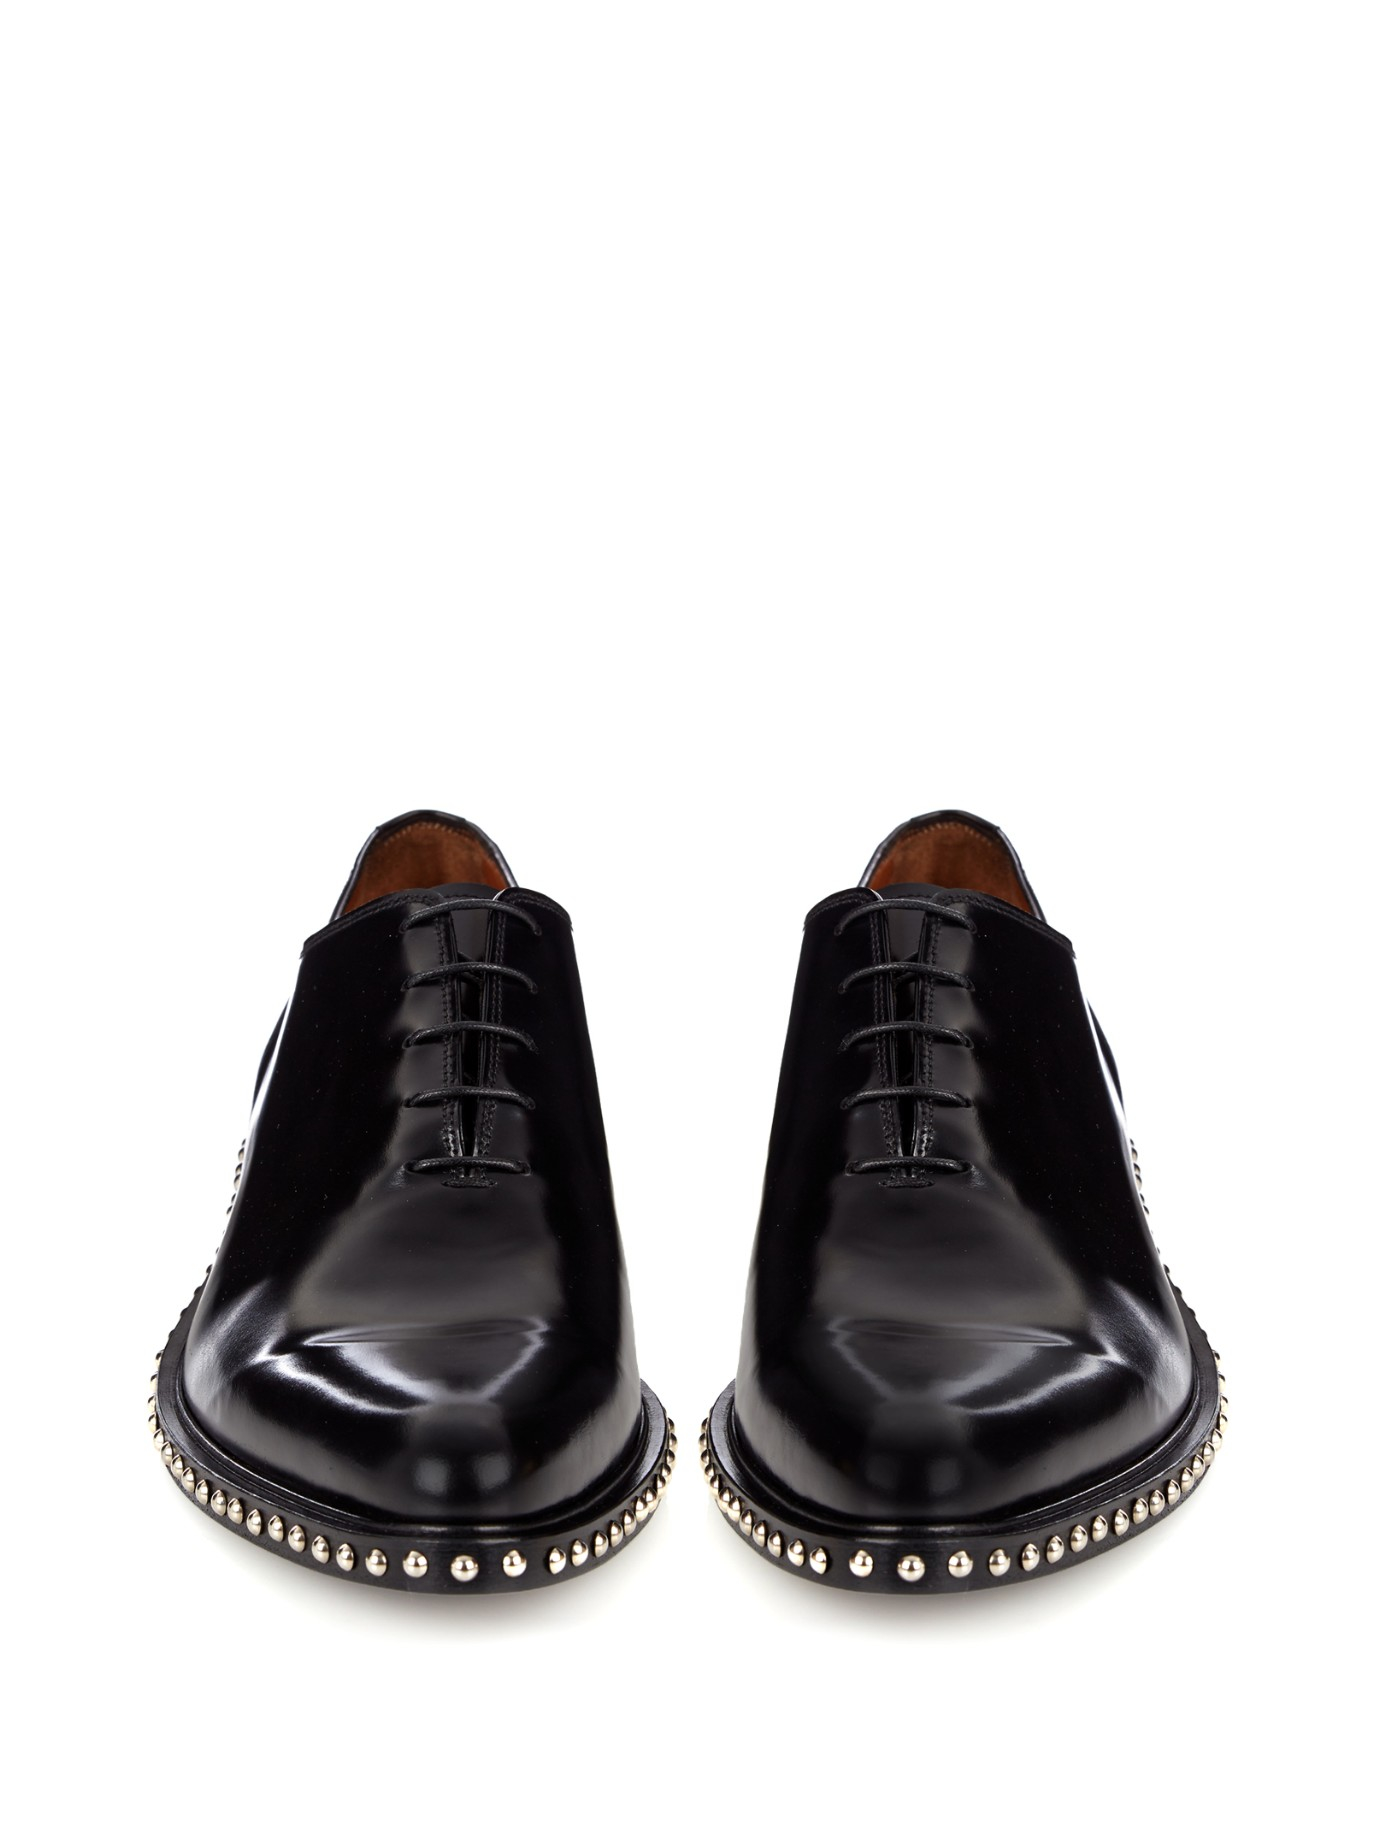 Givenchy Studded Leather Lace-Up Derby 